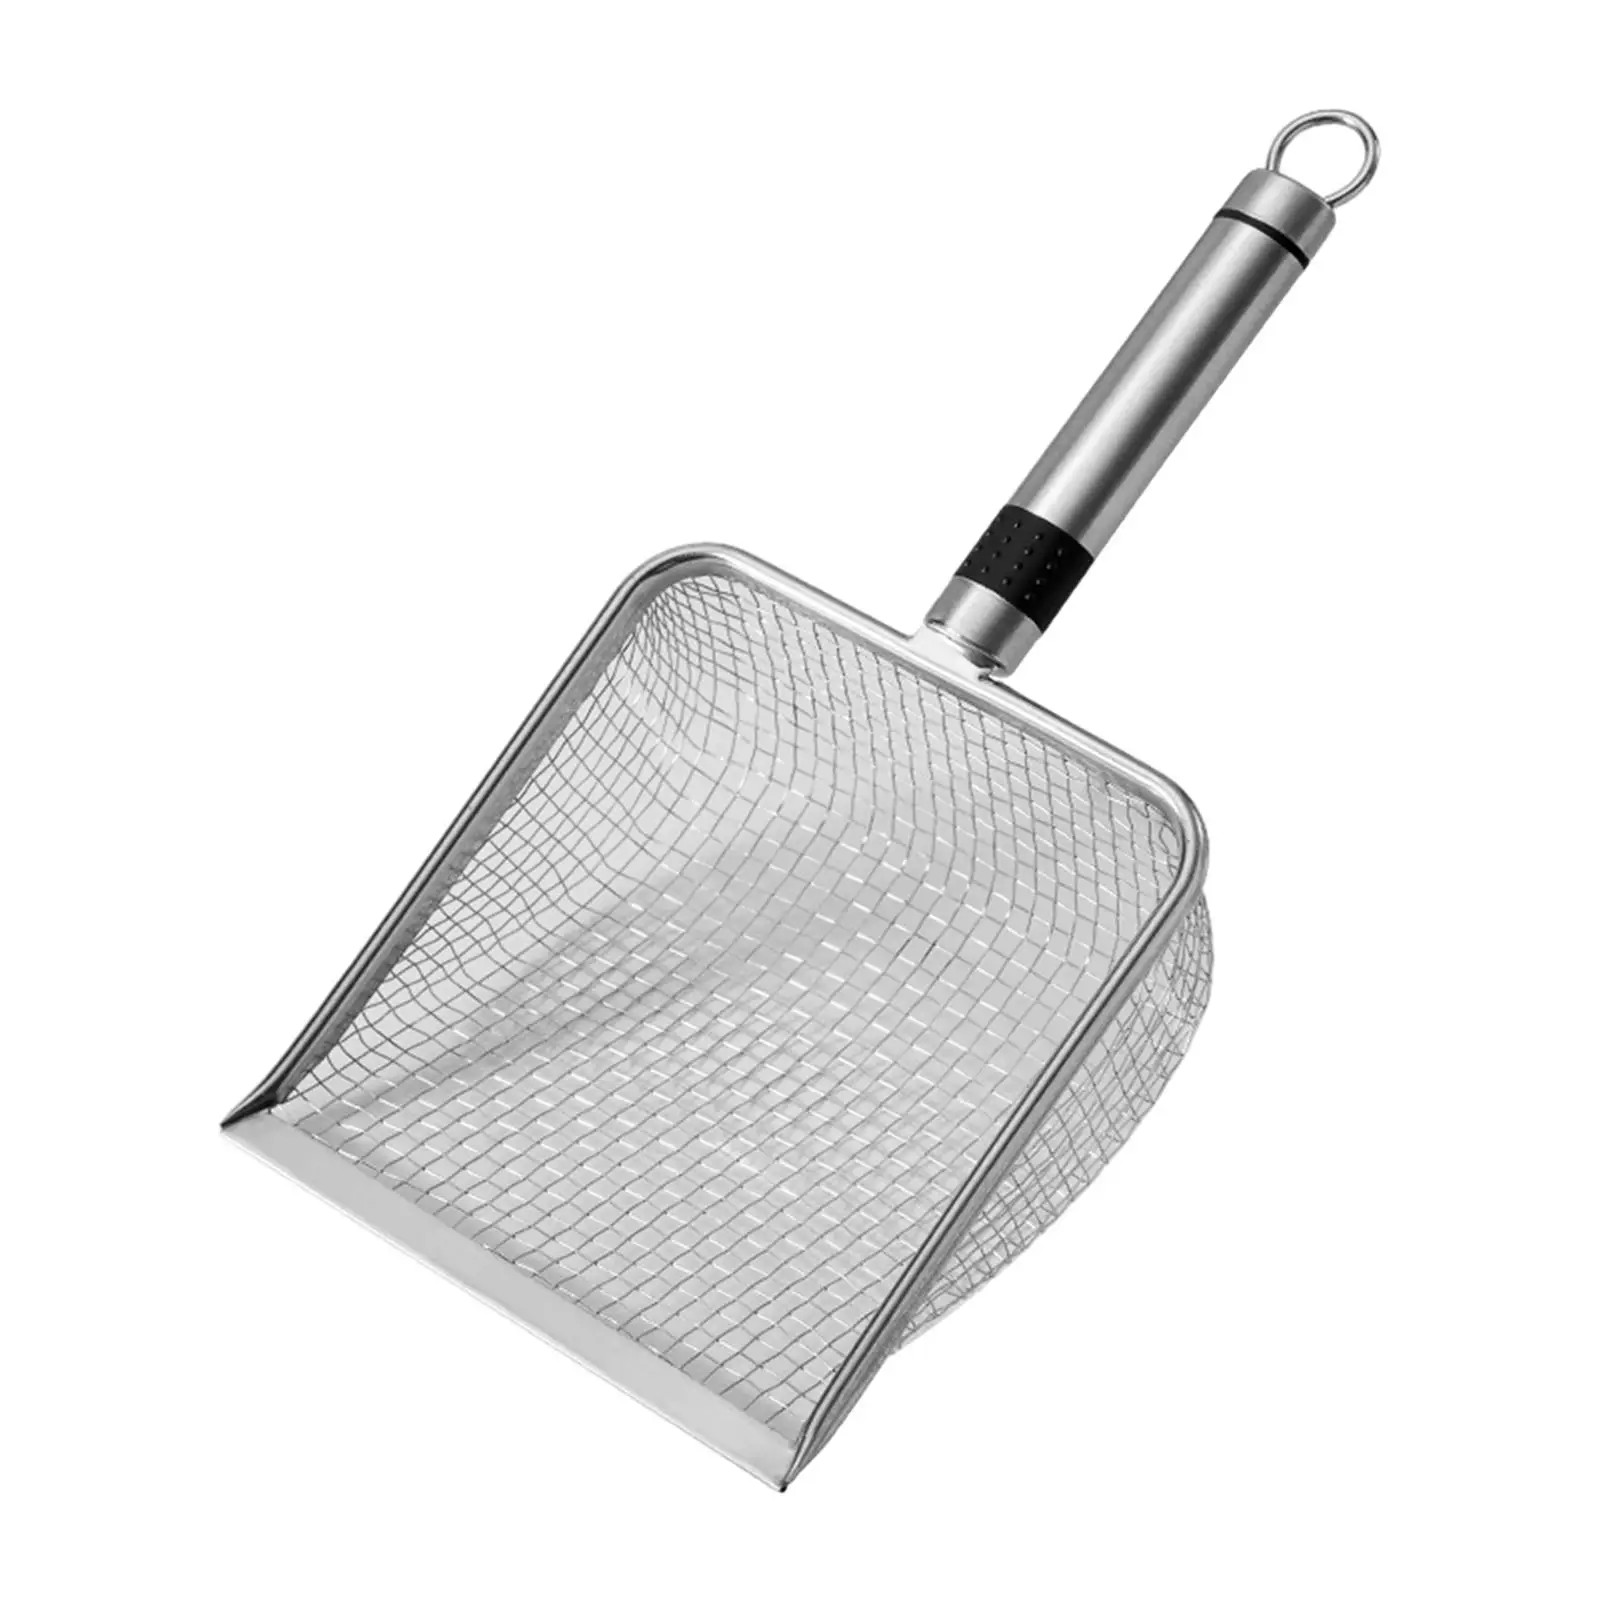 Cats Litter Scooper Pets Sifter Shovels Fast Sifting Cleaning Tool Reptile Sand Shovels with Metal Handle Litter Boxes,